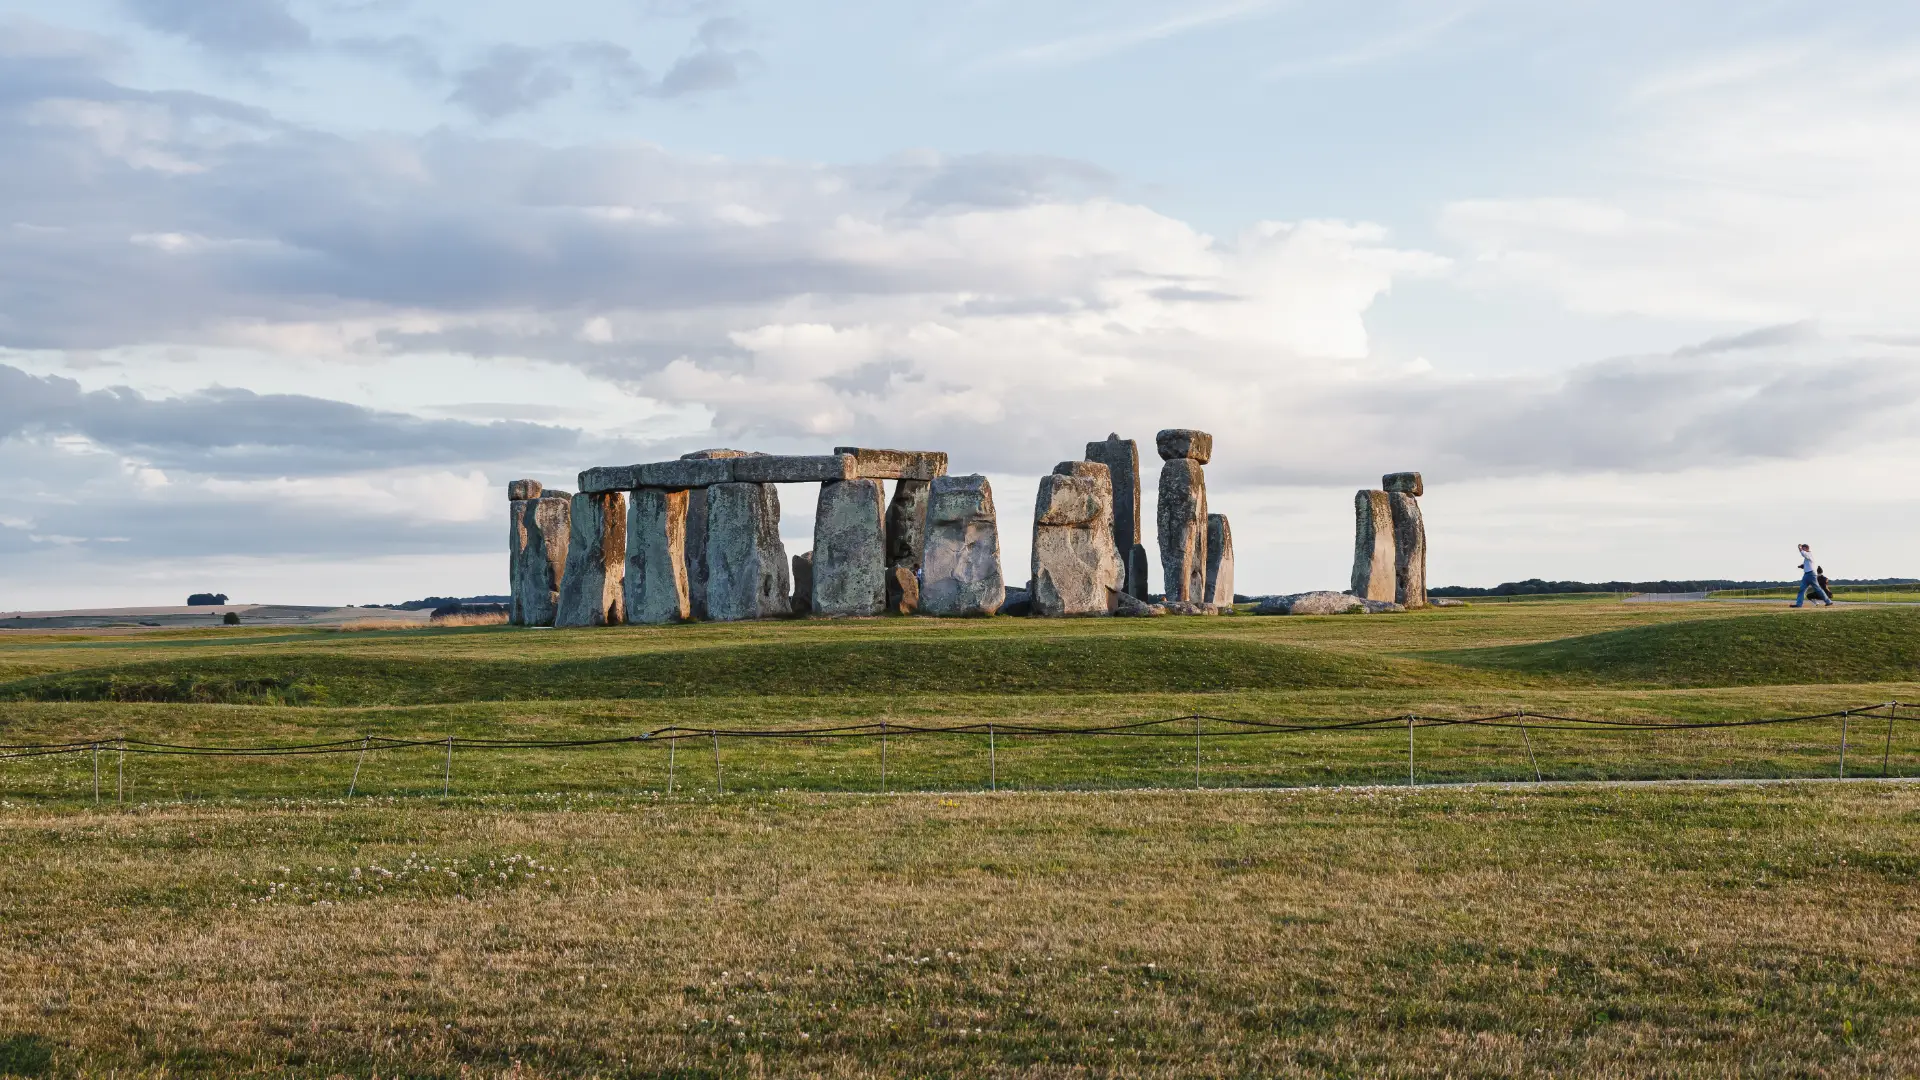 Ancient stonehenge monument with large standing stones arranged in a circle, under a vast sky with scattered clouds, surrounded by a grassy landscape. a lone visitor is visible in the distance.